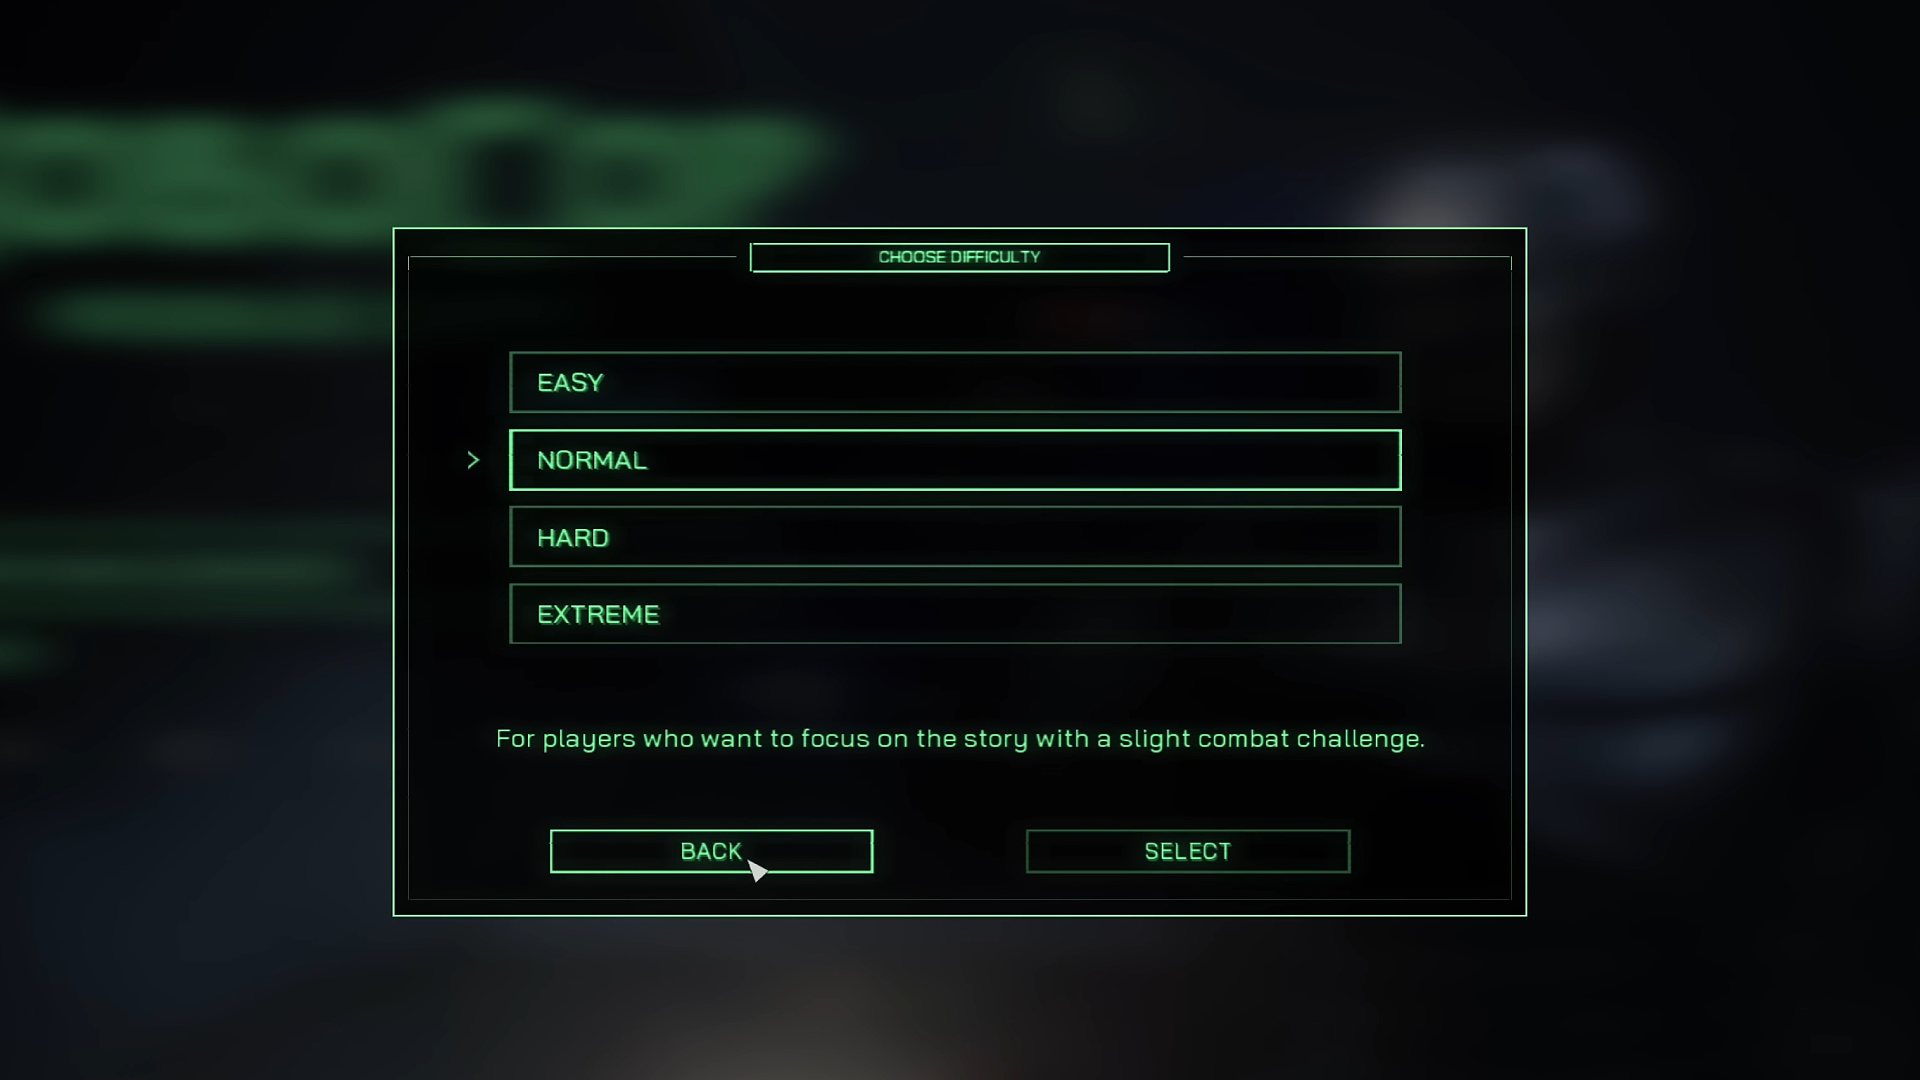 The Difficulty settings in RoboCop: Rogue City